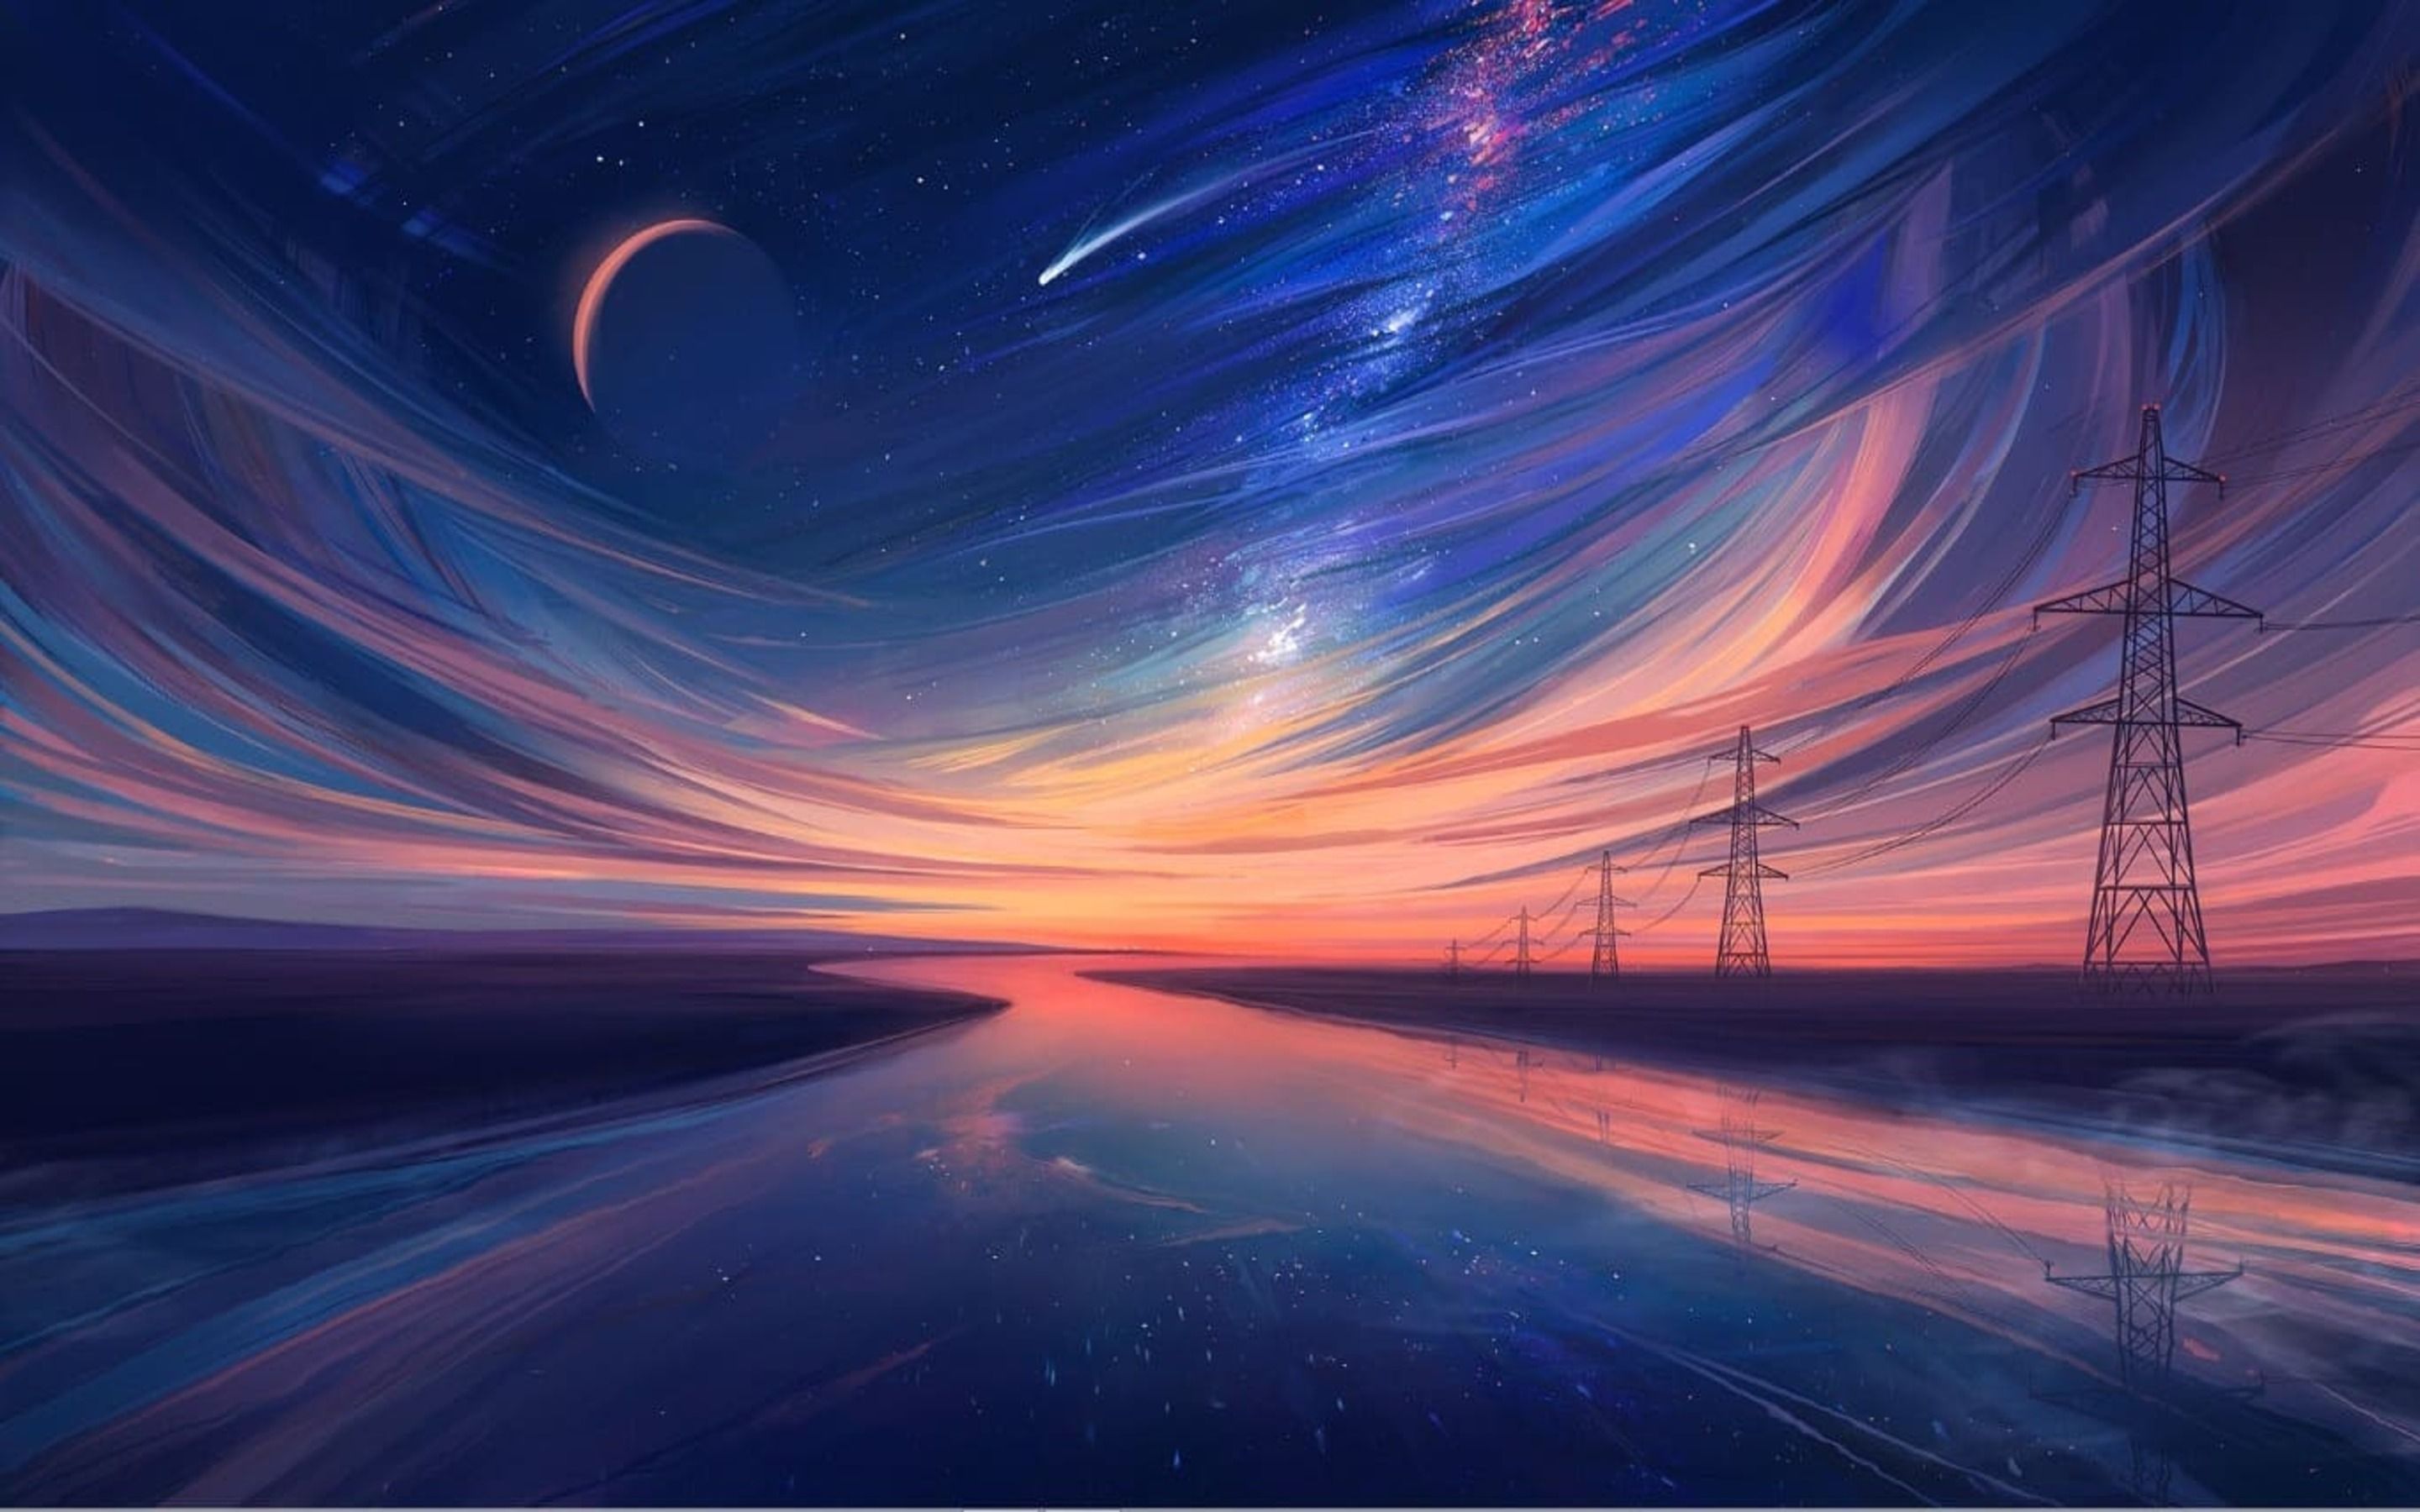 A painting of a sky with stars, a planet, and a shooting star. - MacBook, landscape